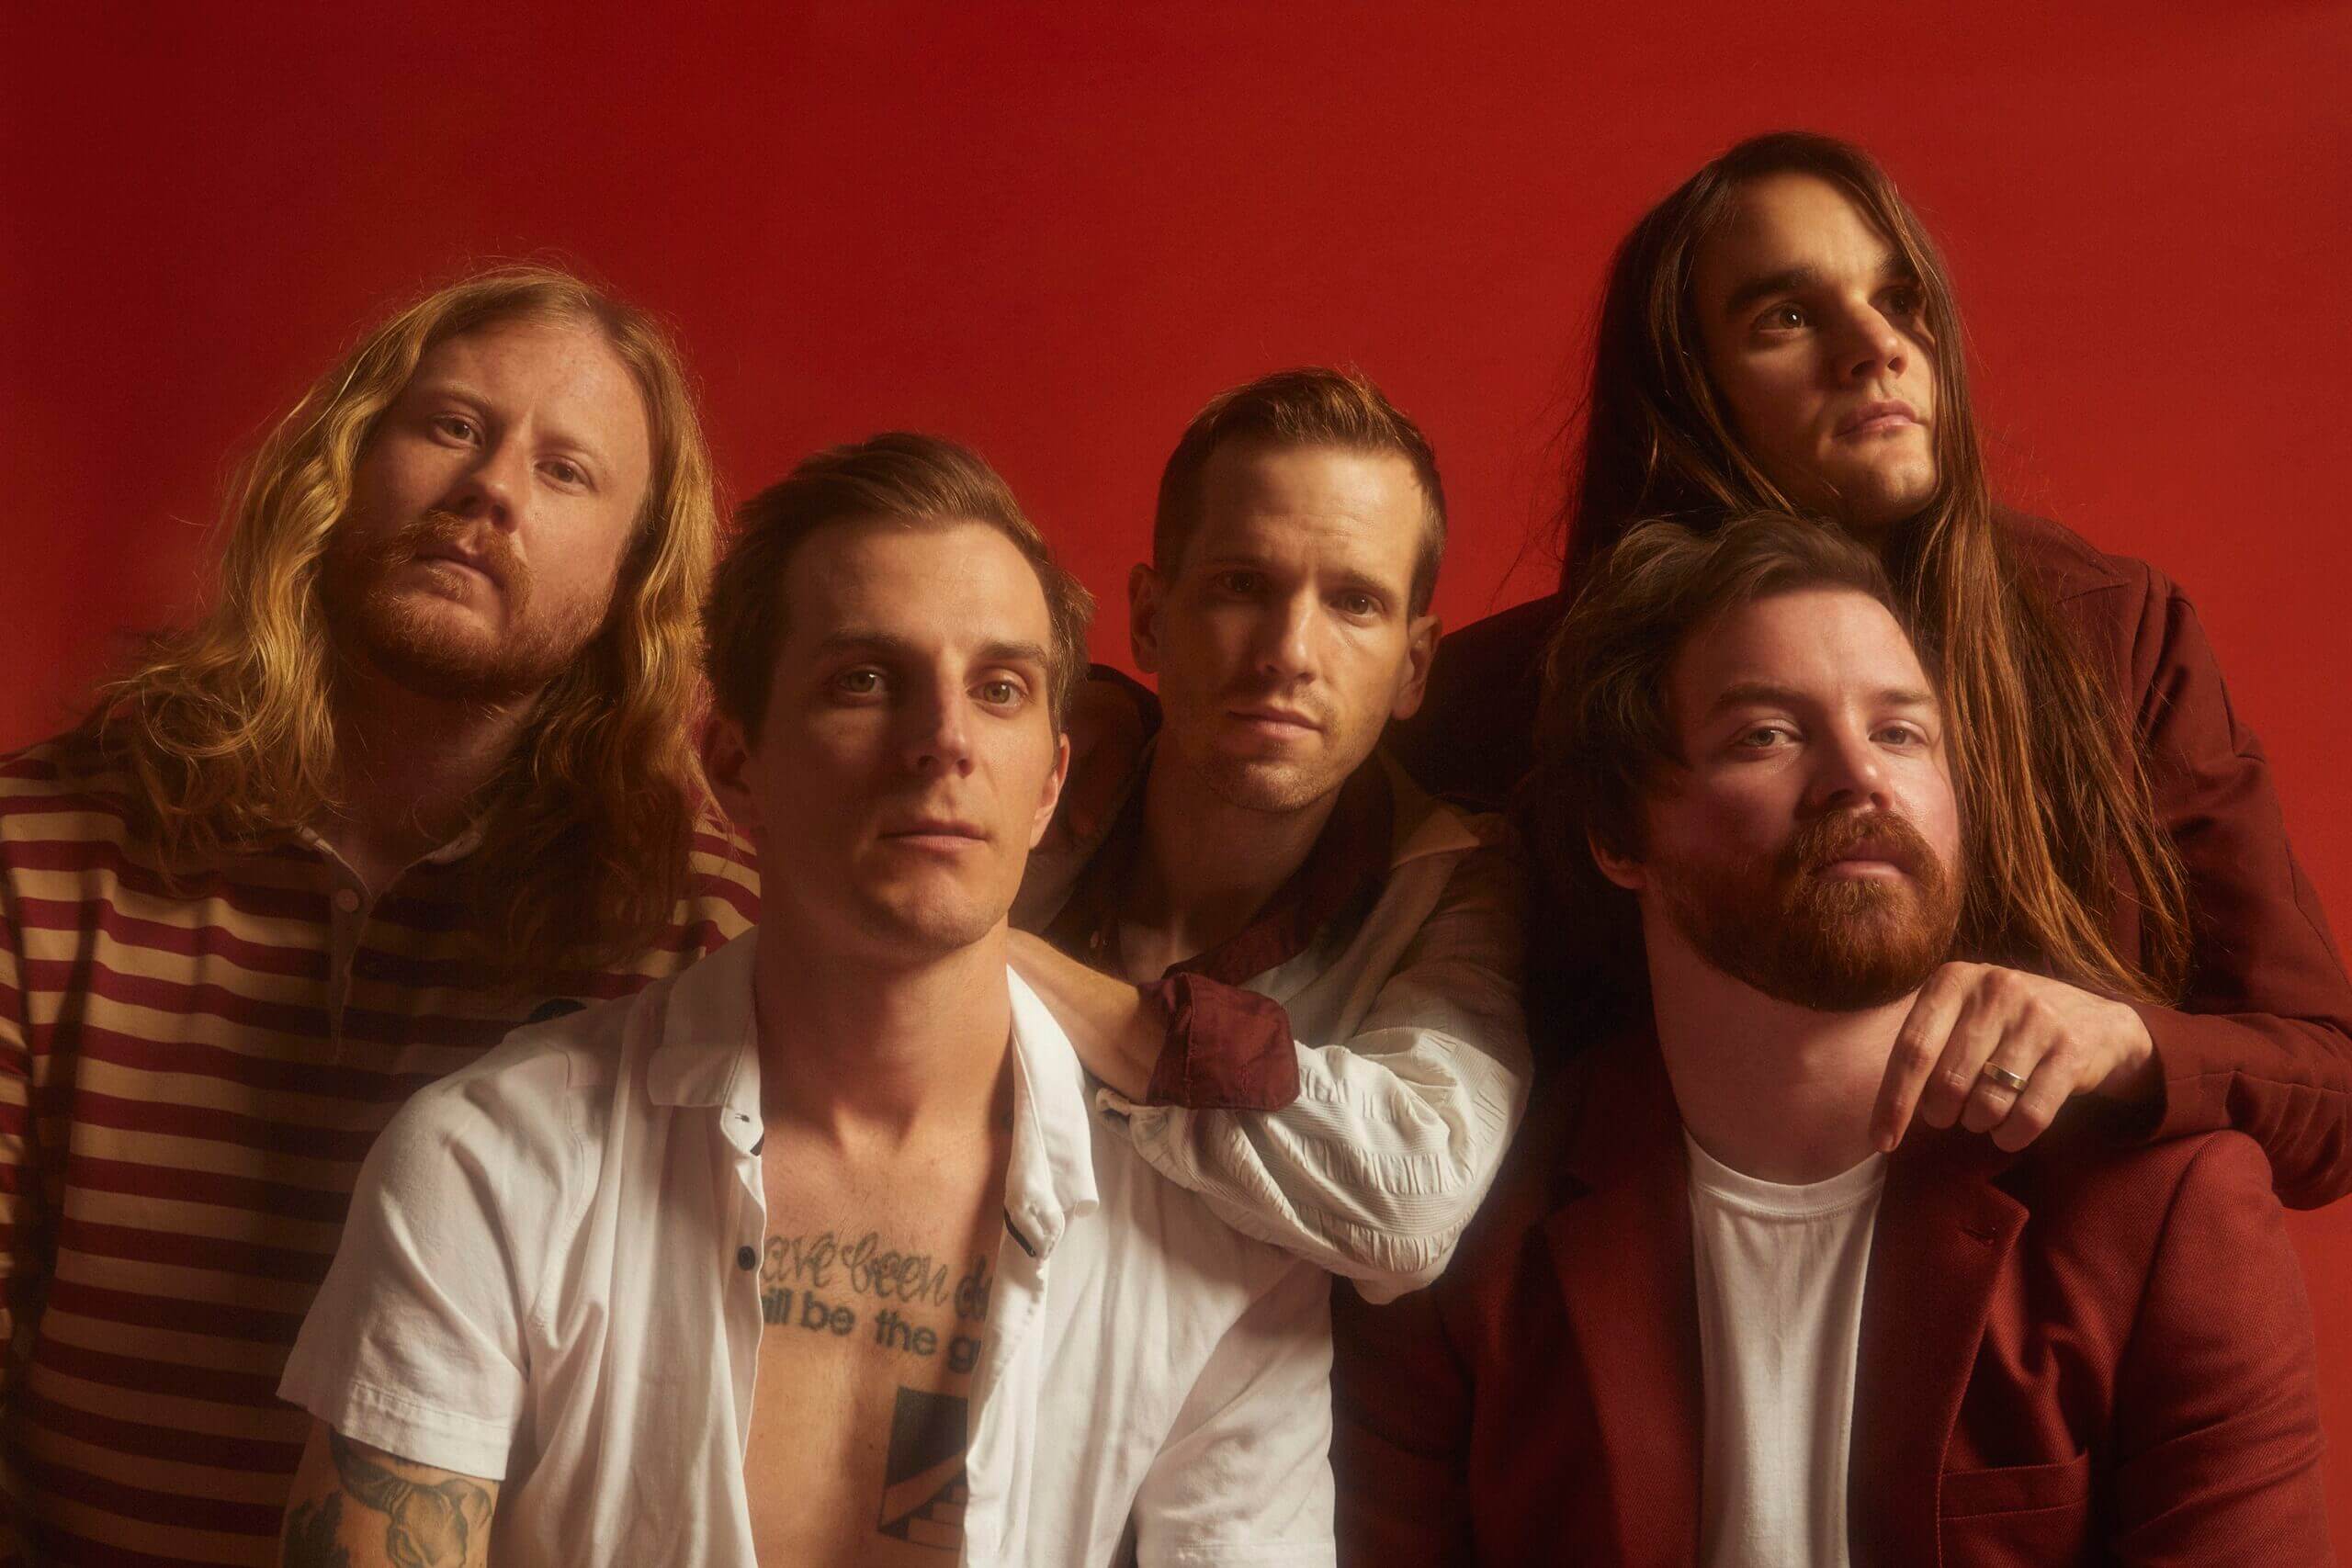 THE MAINE RELEASE MUSIC VIDEO FOR NEW SINGLE “APRIL 7TH”